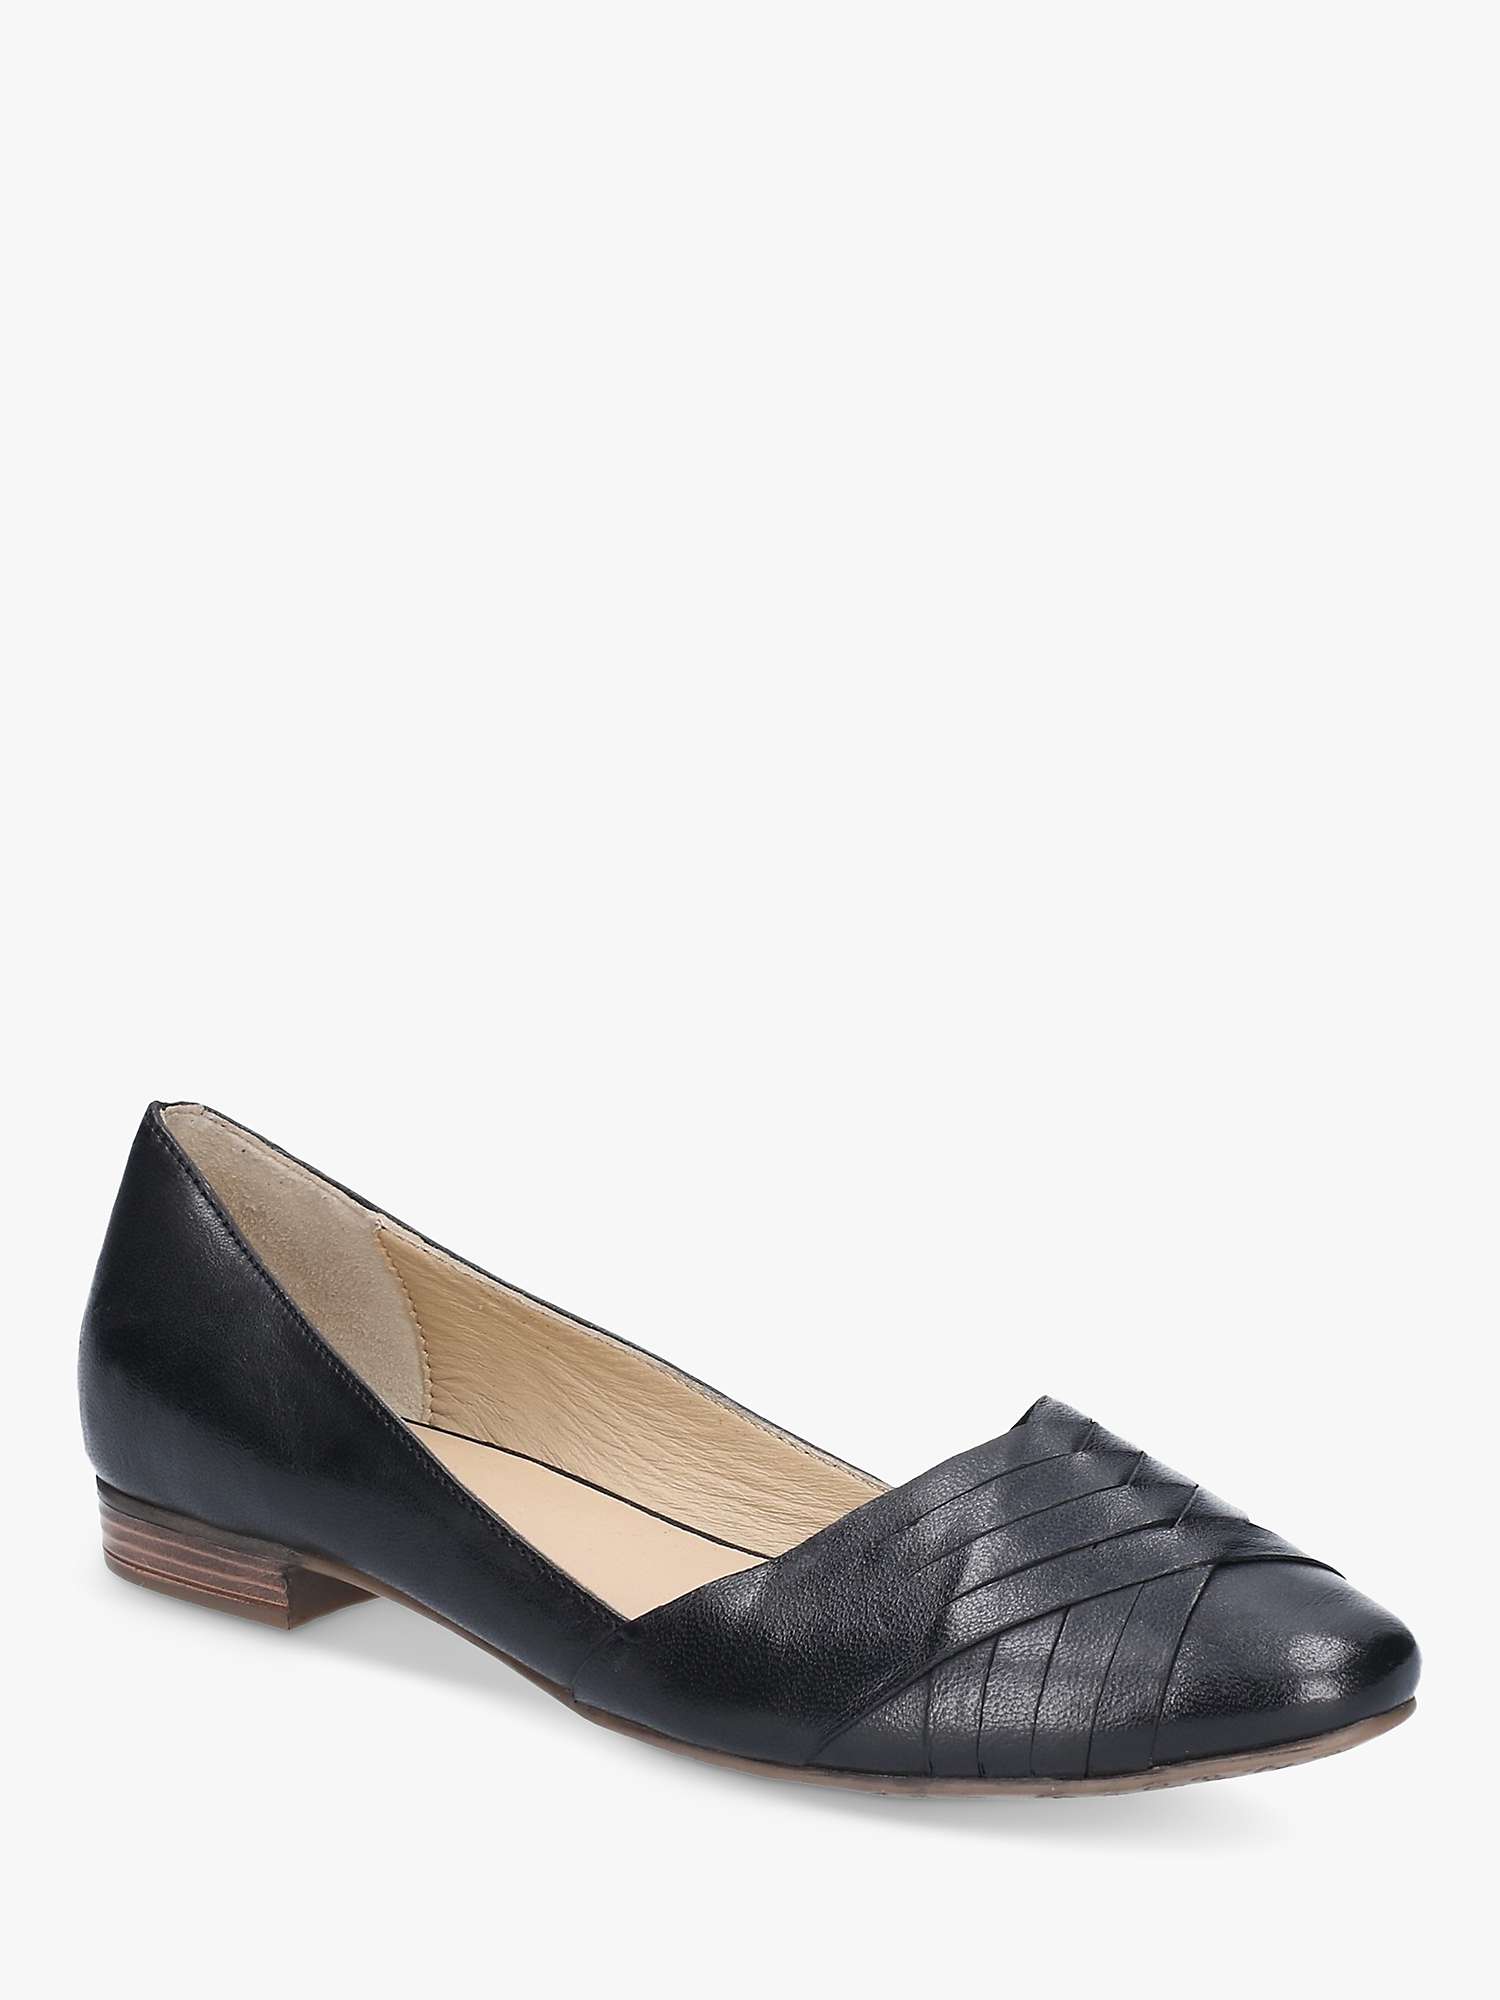 Buy Hush Puppies Marley Leather Ballerina Slip On Shoes Online at johnlewis.com